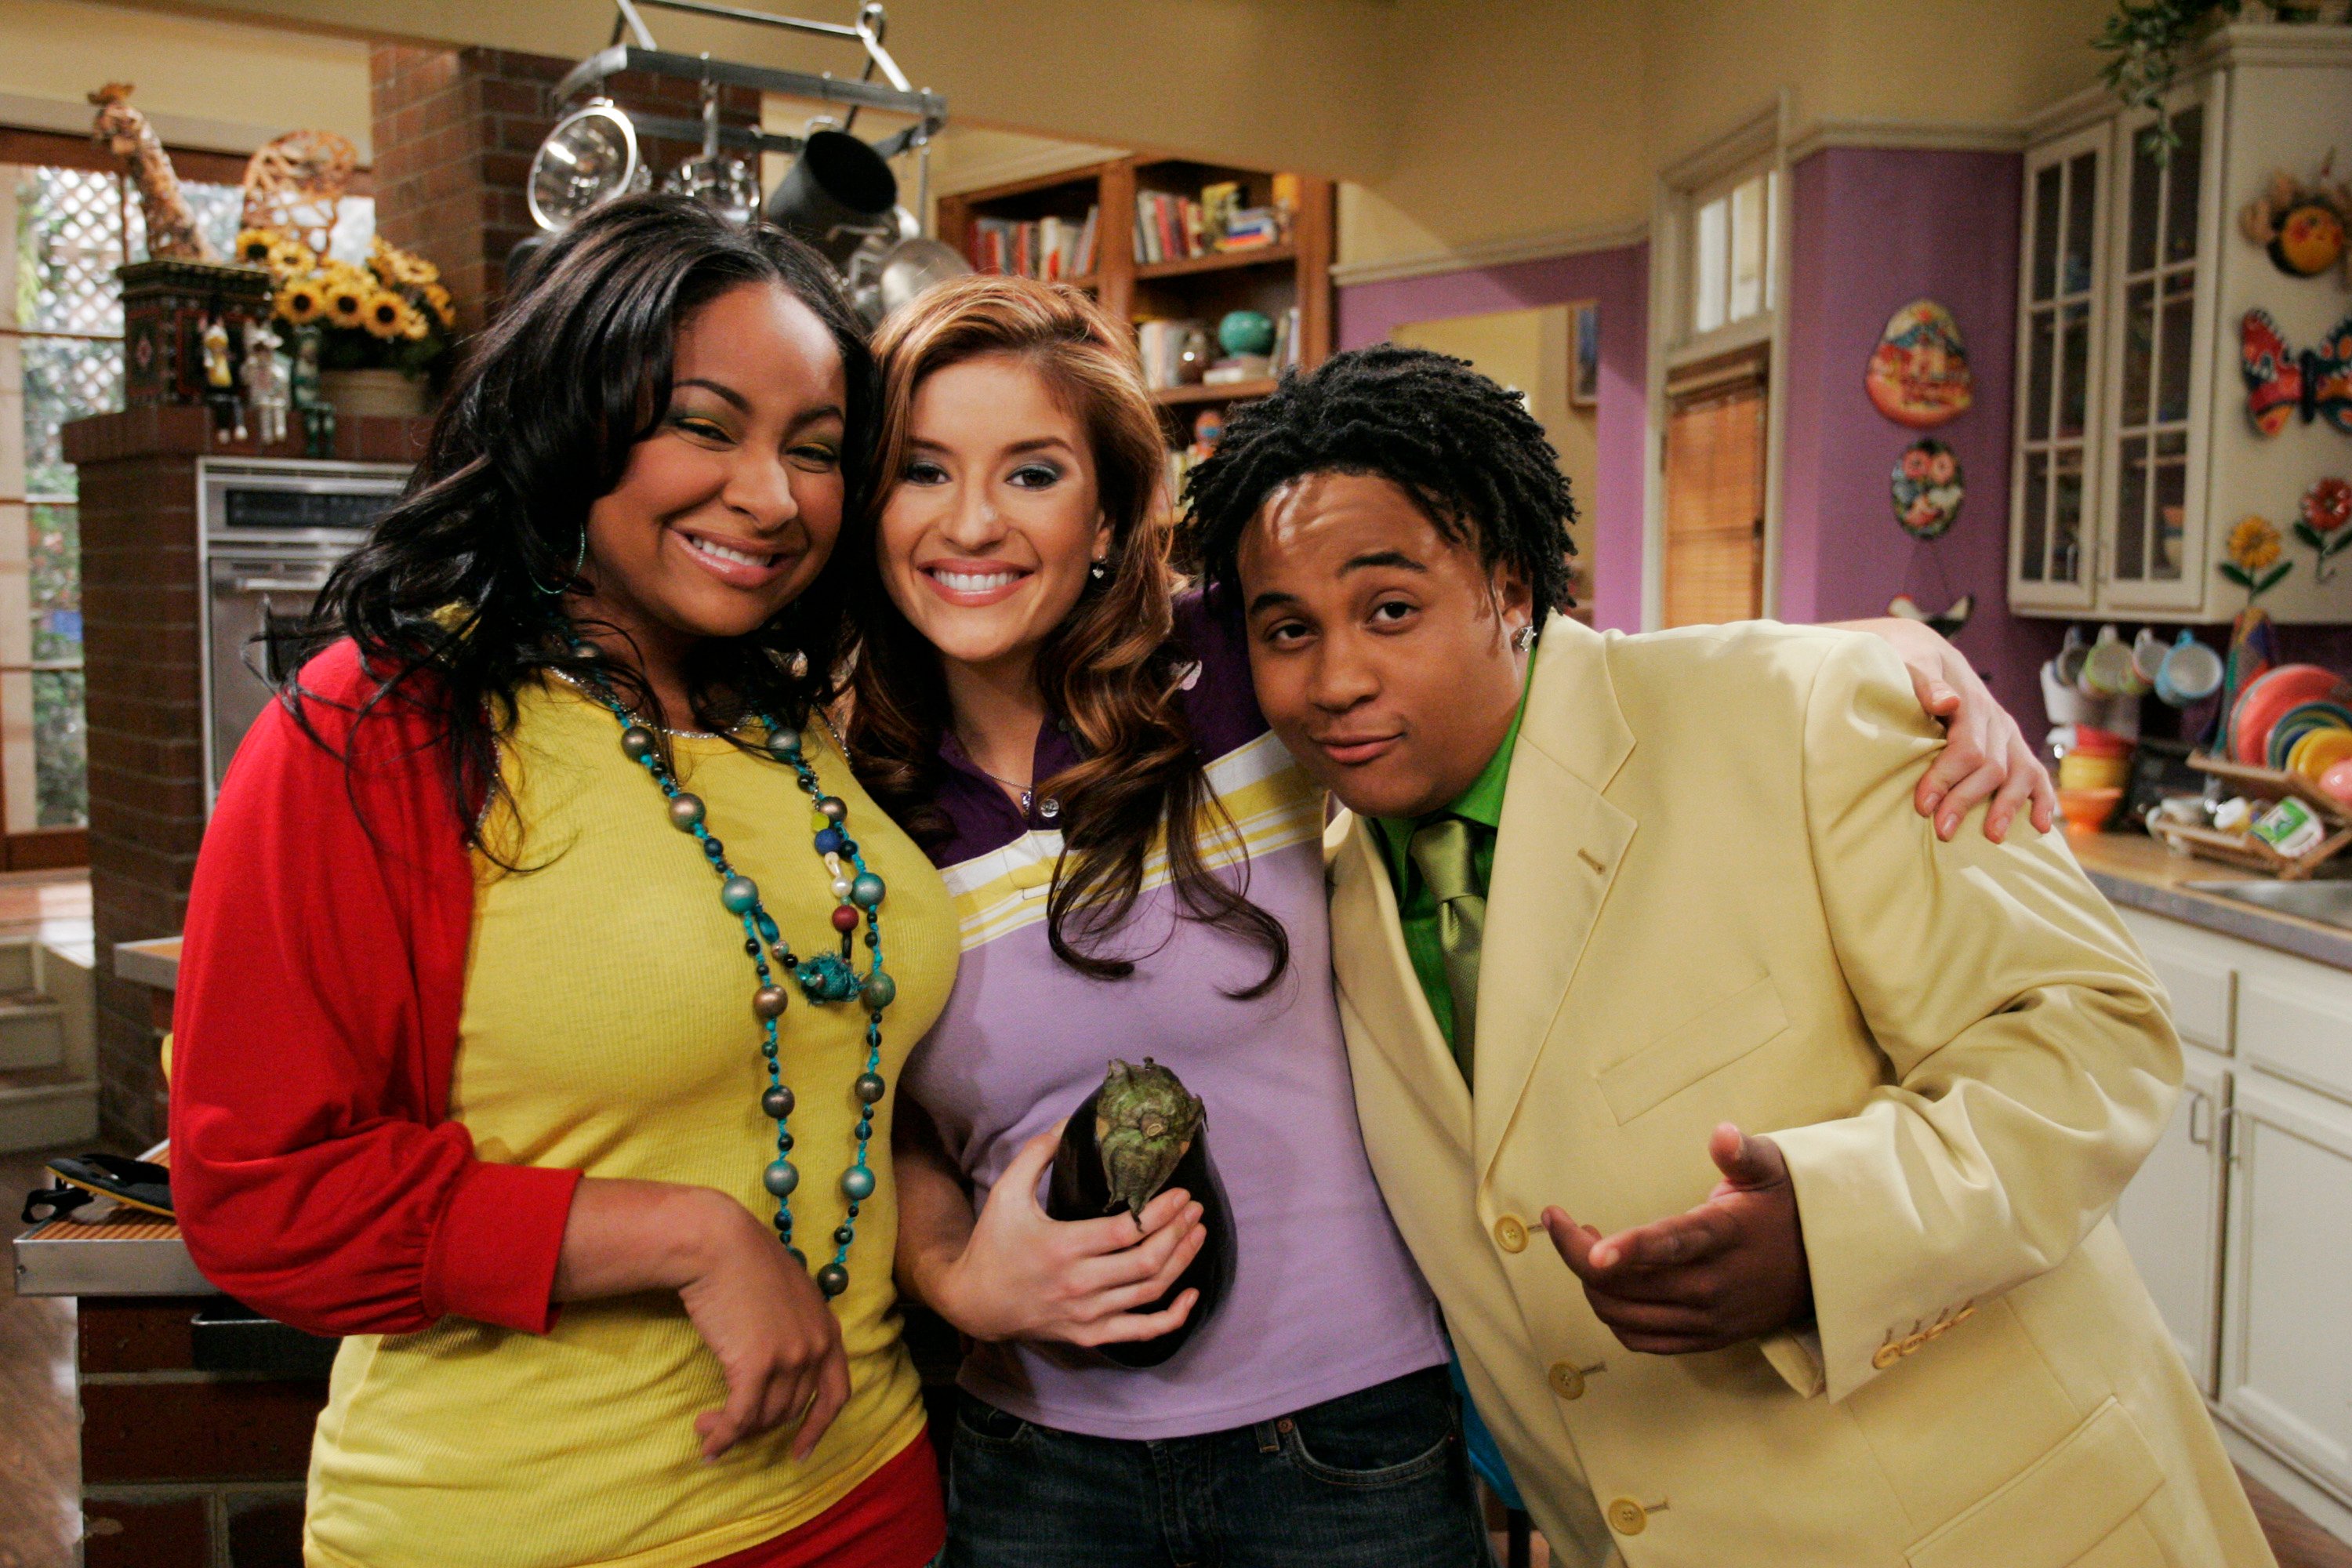 'That's So Raven' episode titled 'Unhappy Medium' smiling for the camera